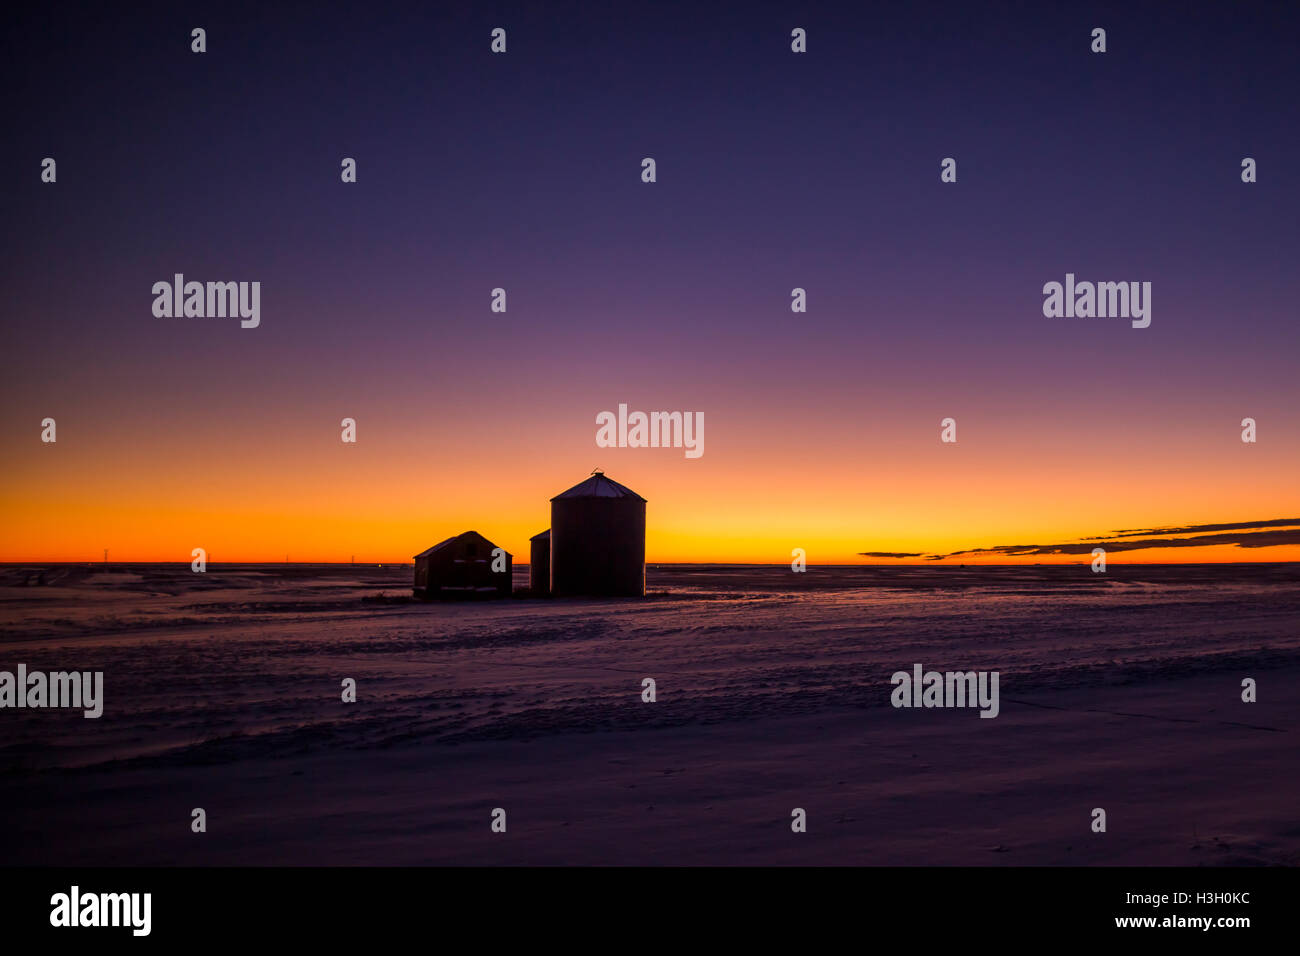 Dawn glows behind farm buildings on a cold morning on the prairies east of High River, Alberta, Canada. Stock Photo